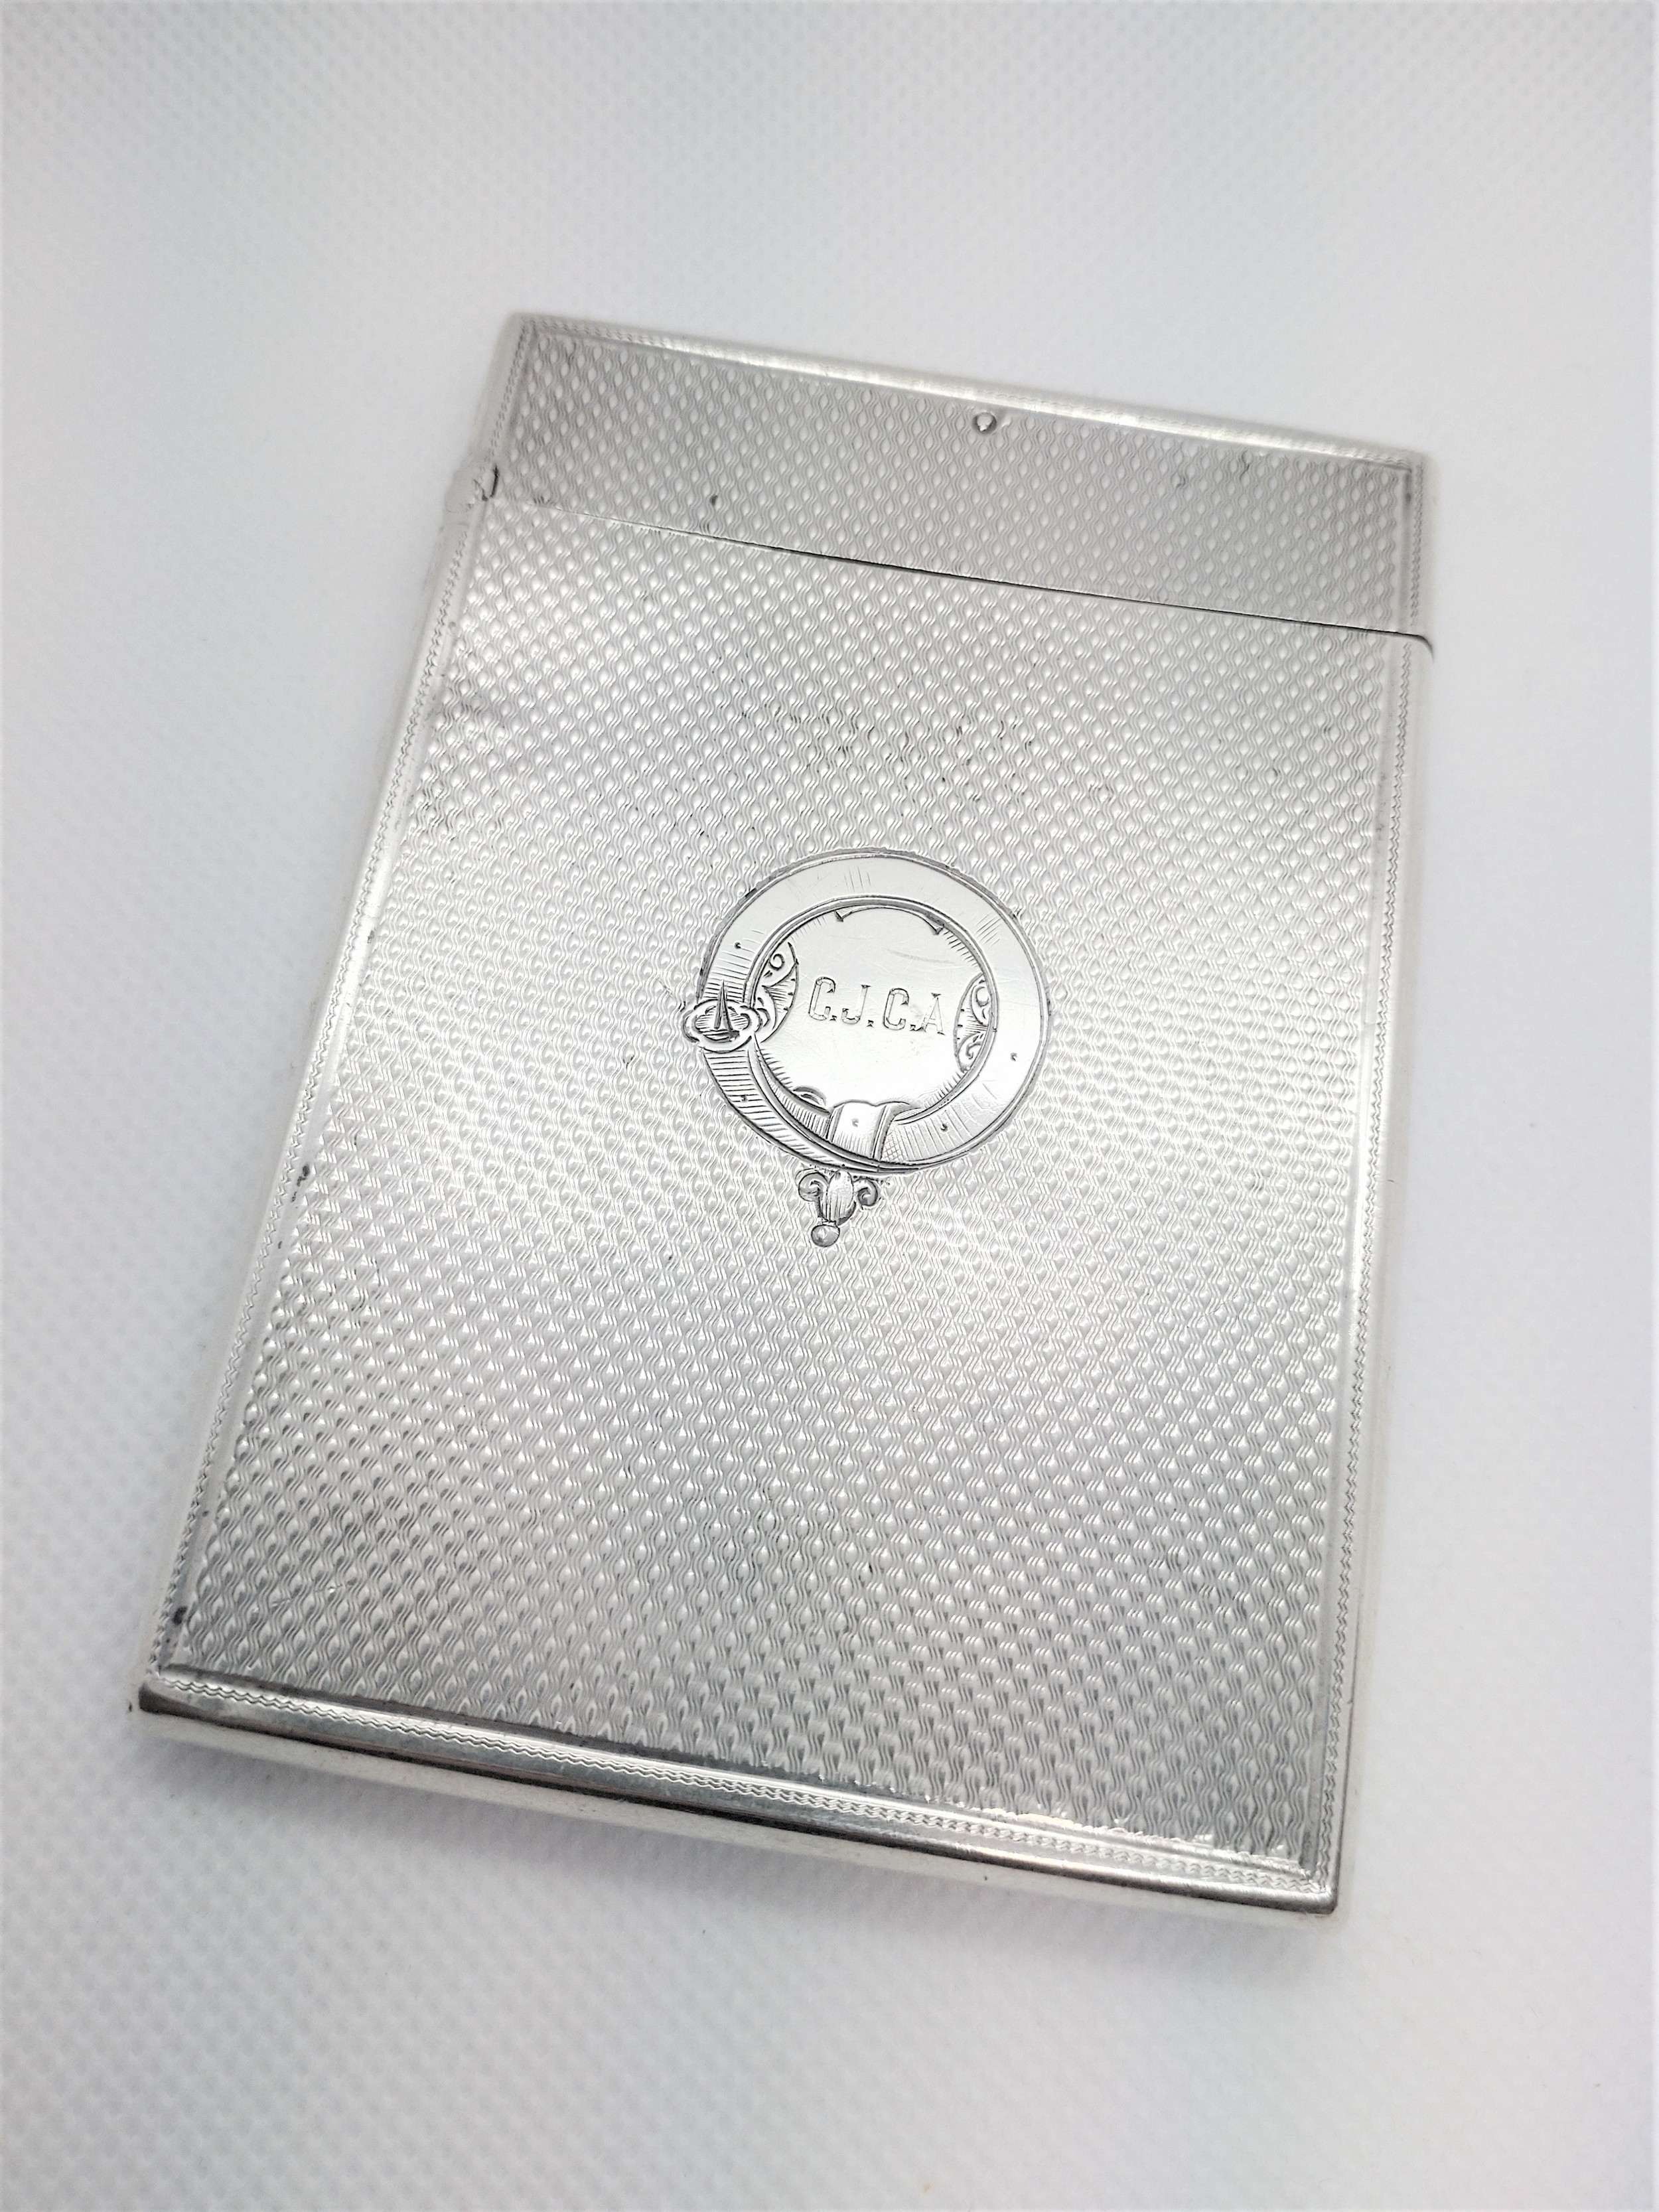 A Victorian sterling silver calling card case. Birmingham 1860. Engraved with initials. 62gms.